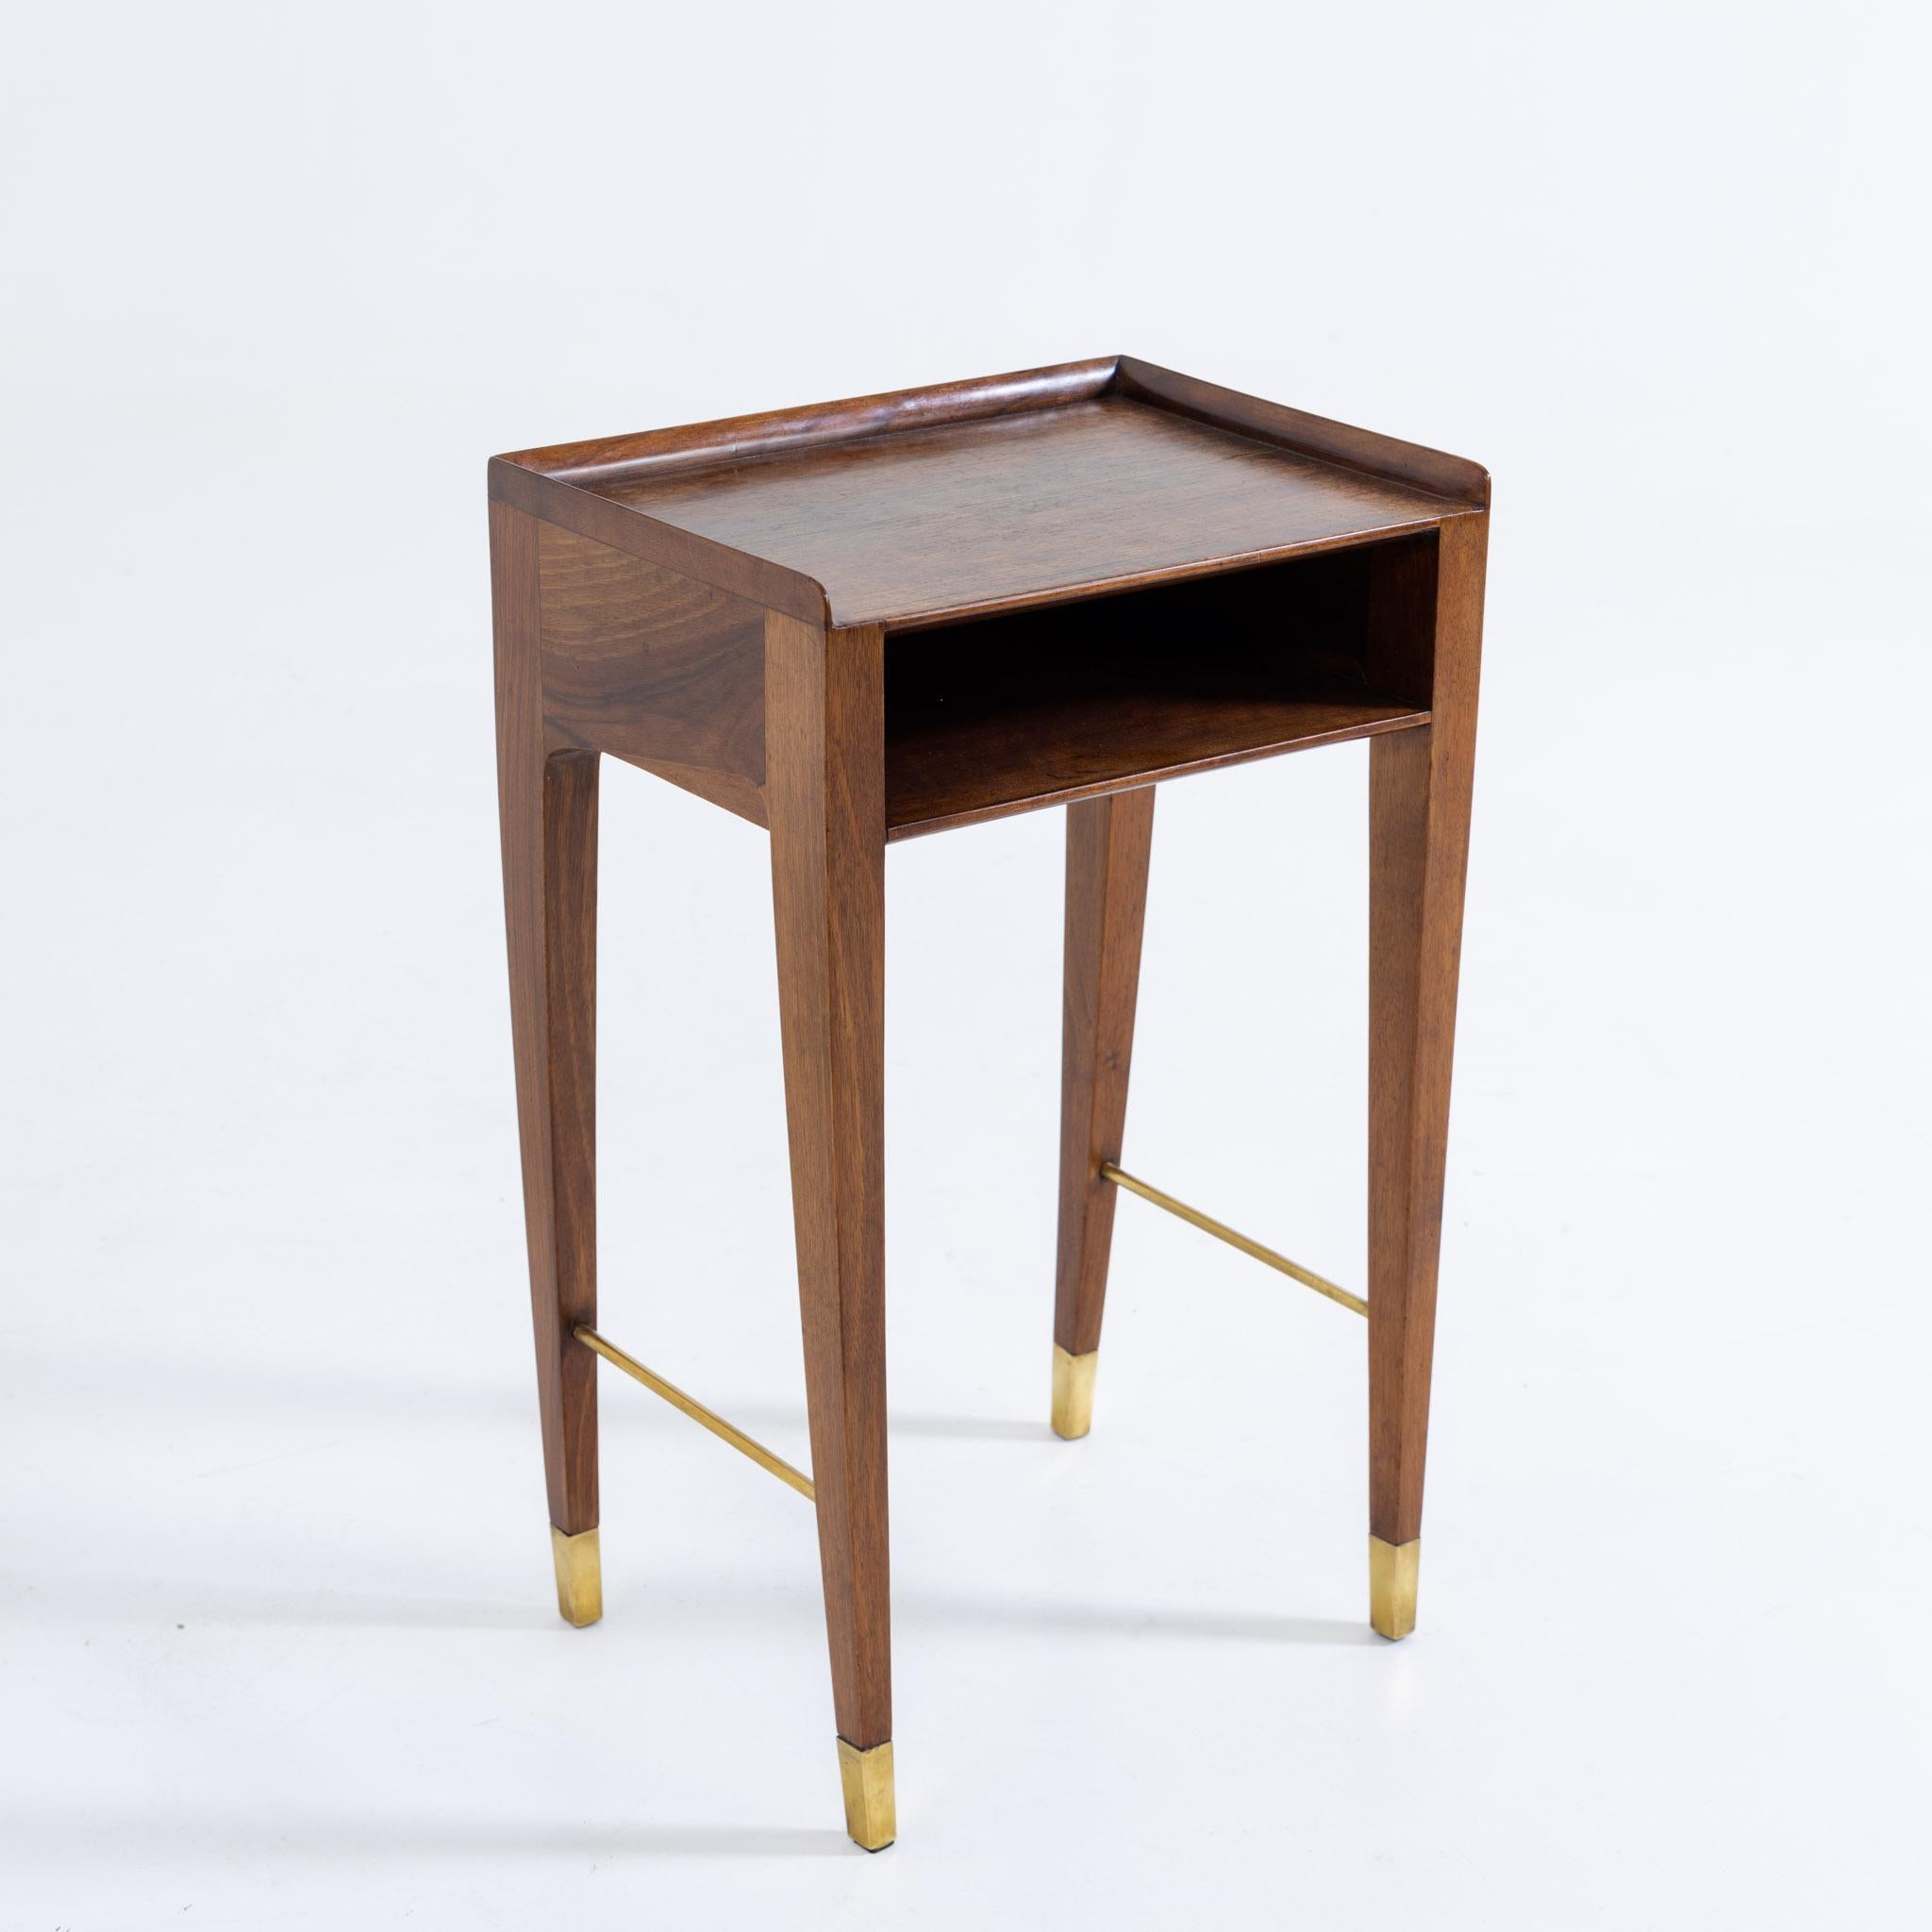 Sidetable with brass braces and feet, one compartment and a low ledge on three sides of the top.